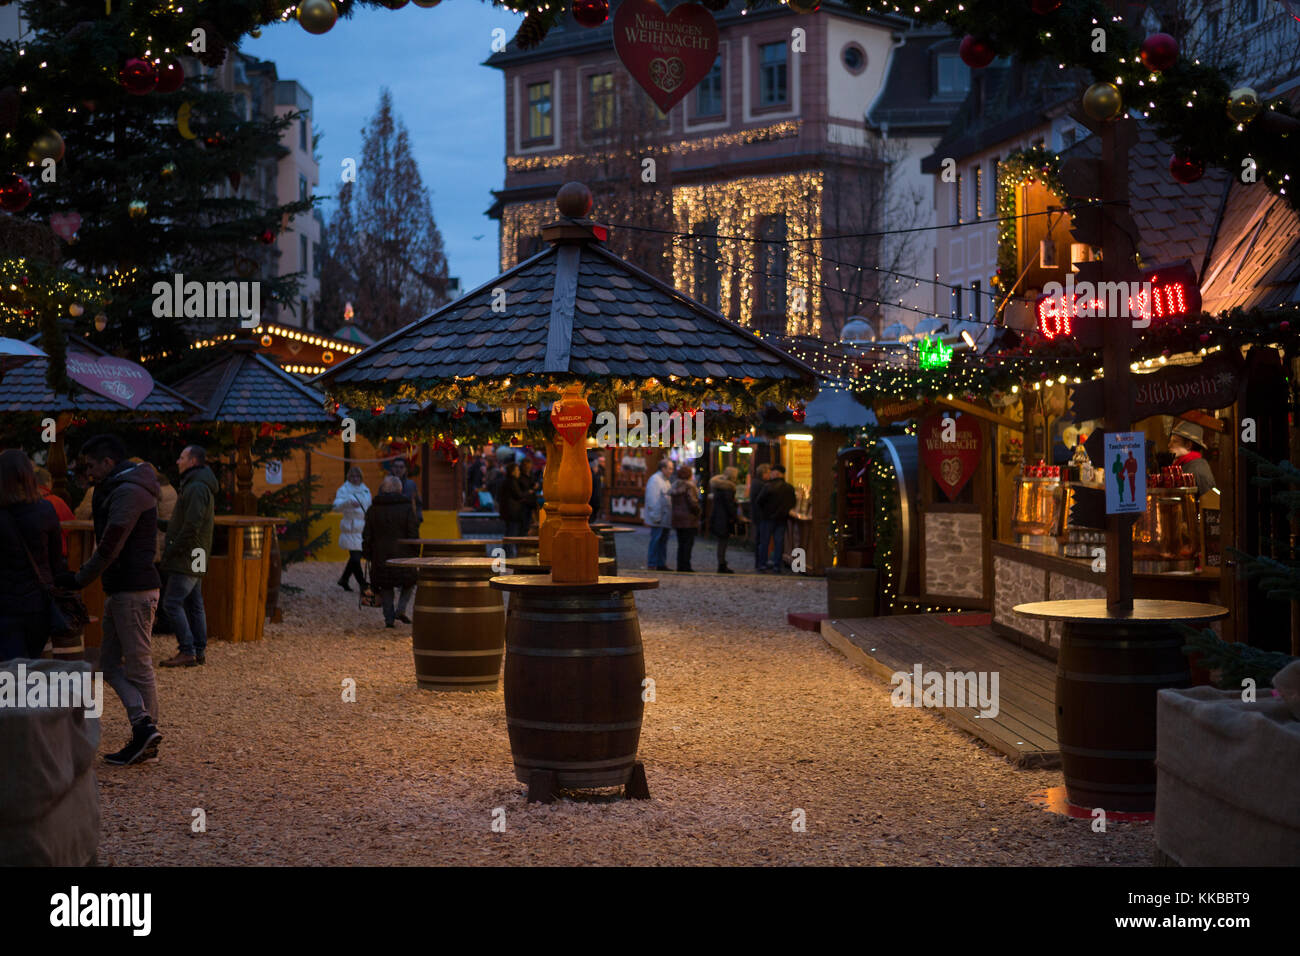 Food an mulled wine stalls at the Nibelungen Christmas market. The local court house can be seen in the background. The Christmas market in Worms, Ger Stock Photo